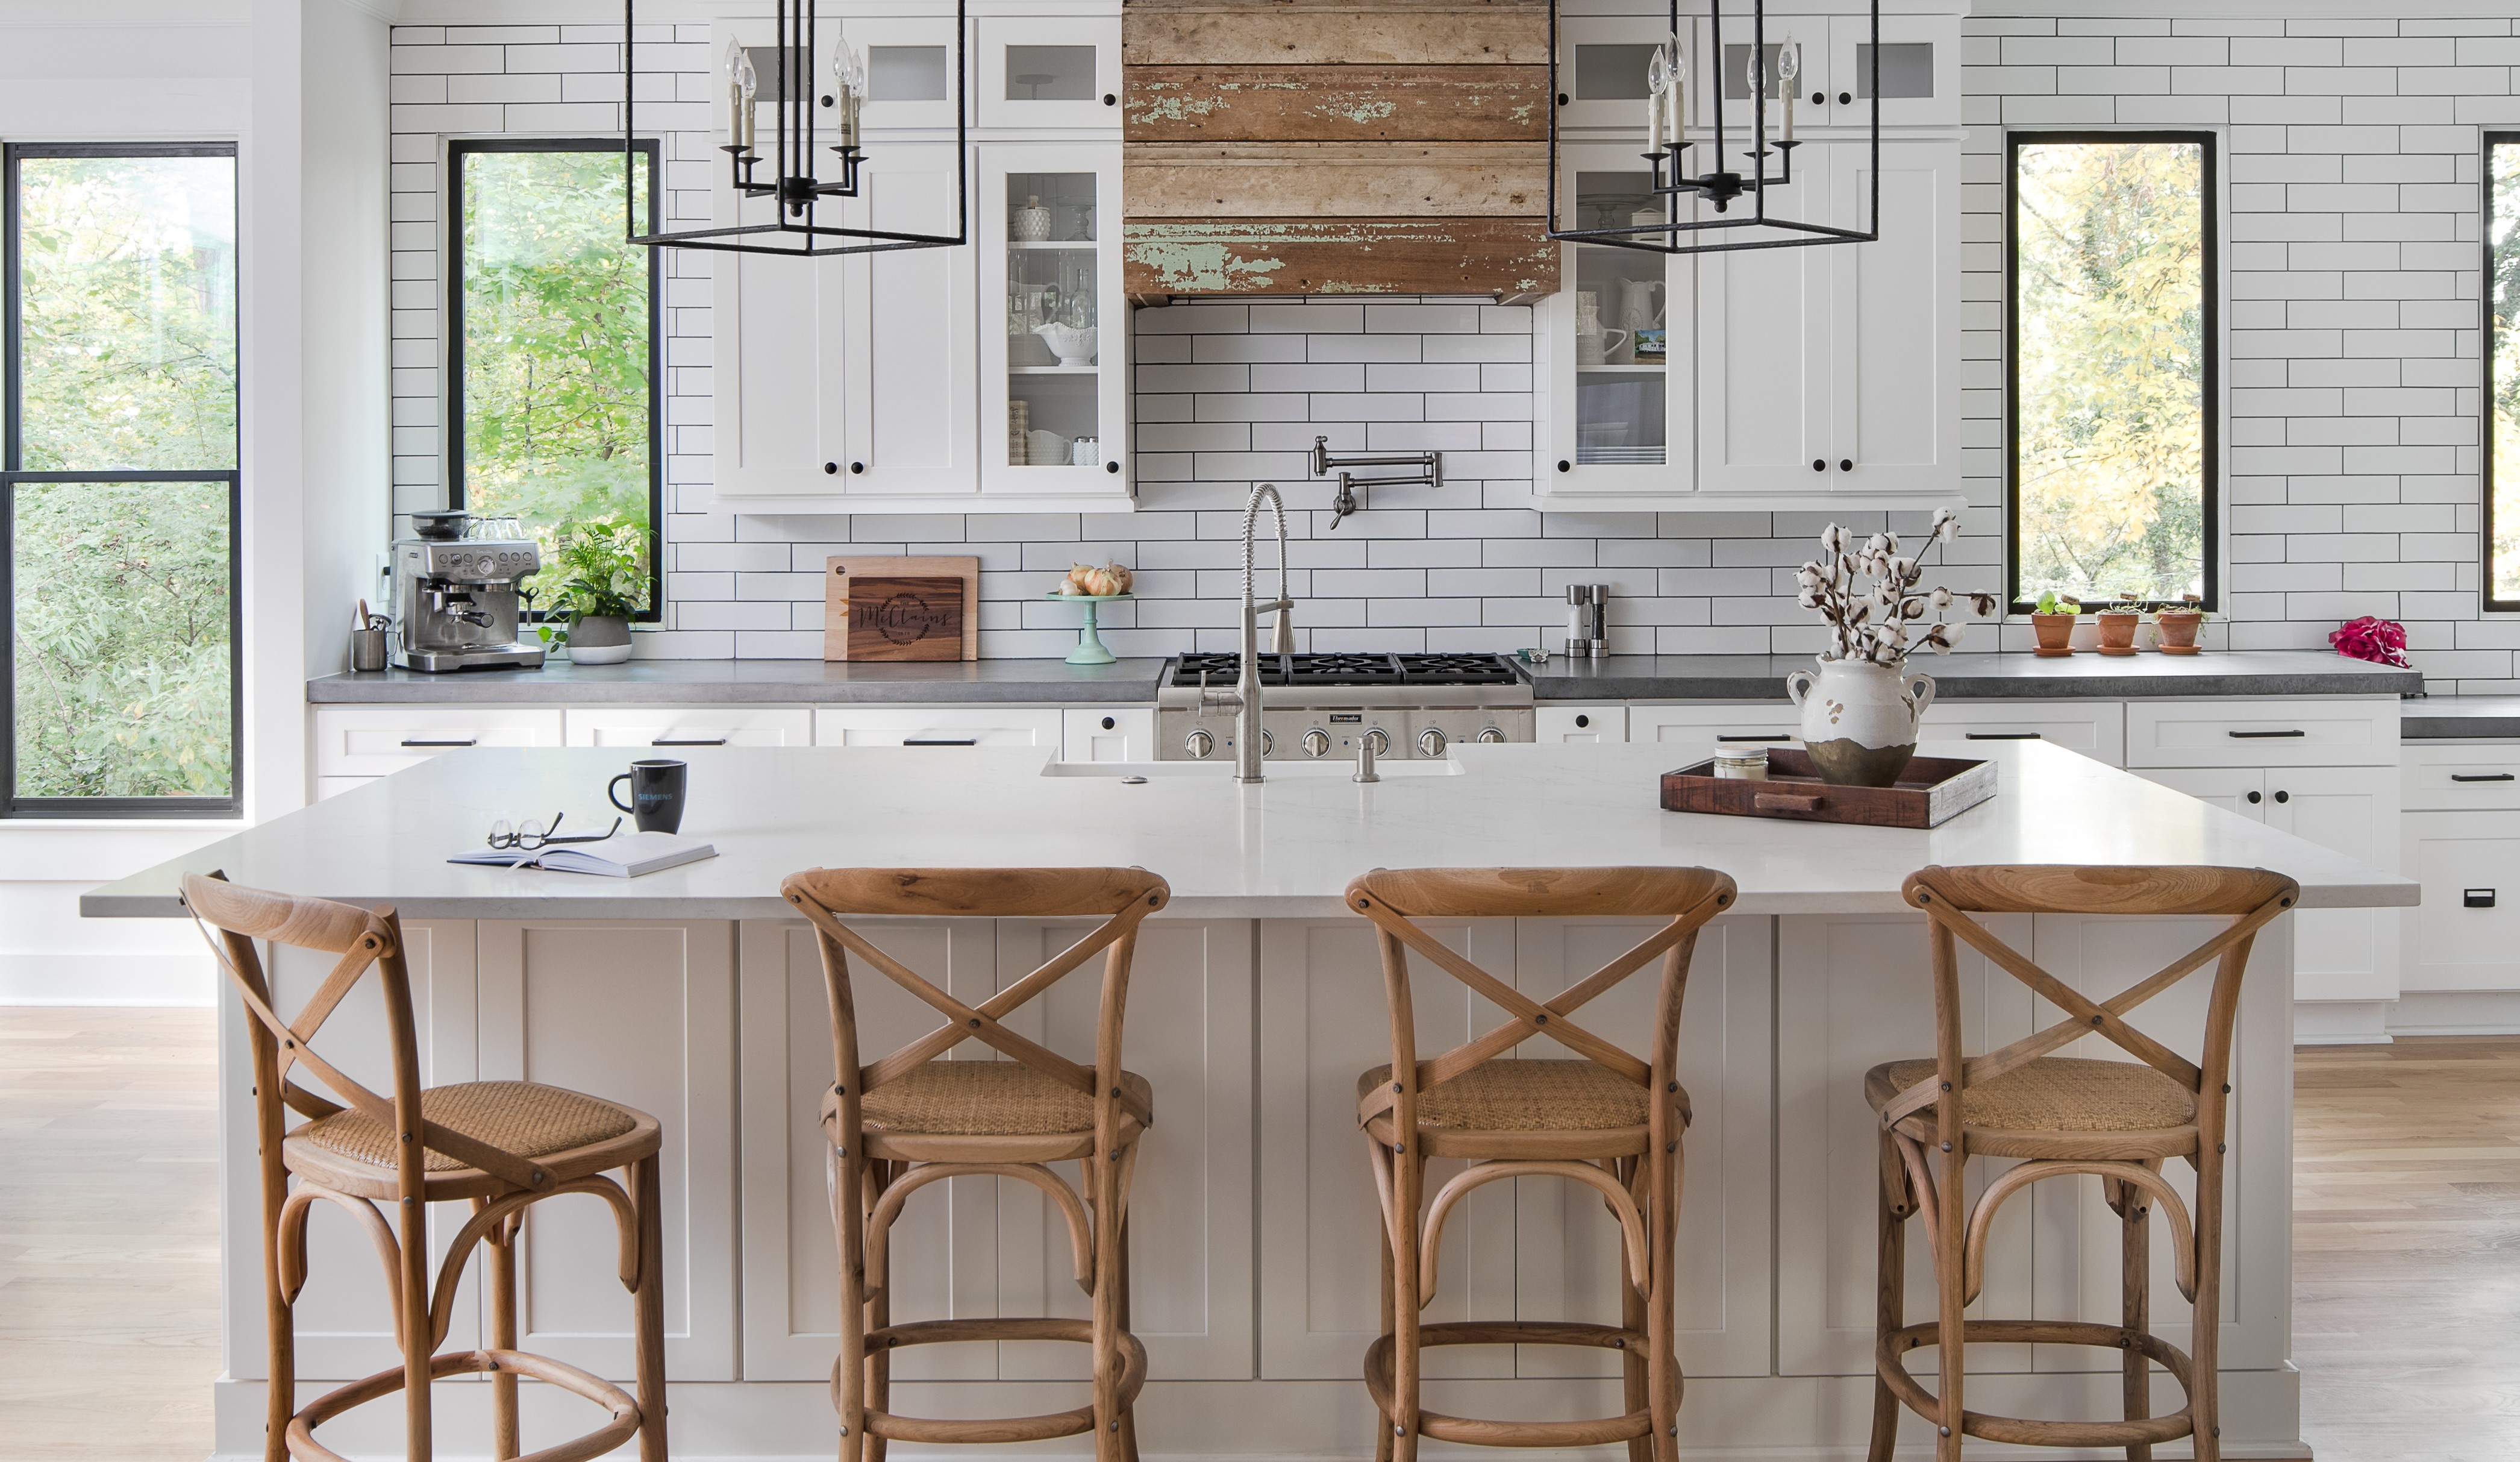 Why White Cabinets Are Popular?